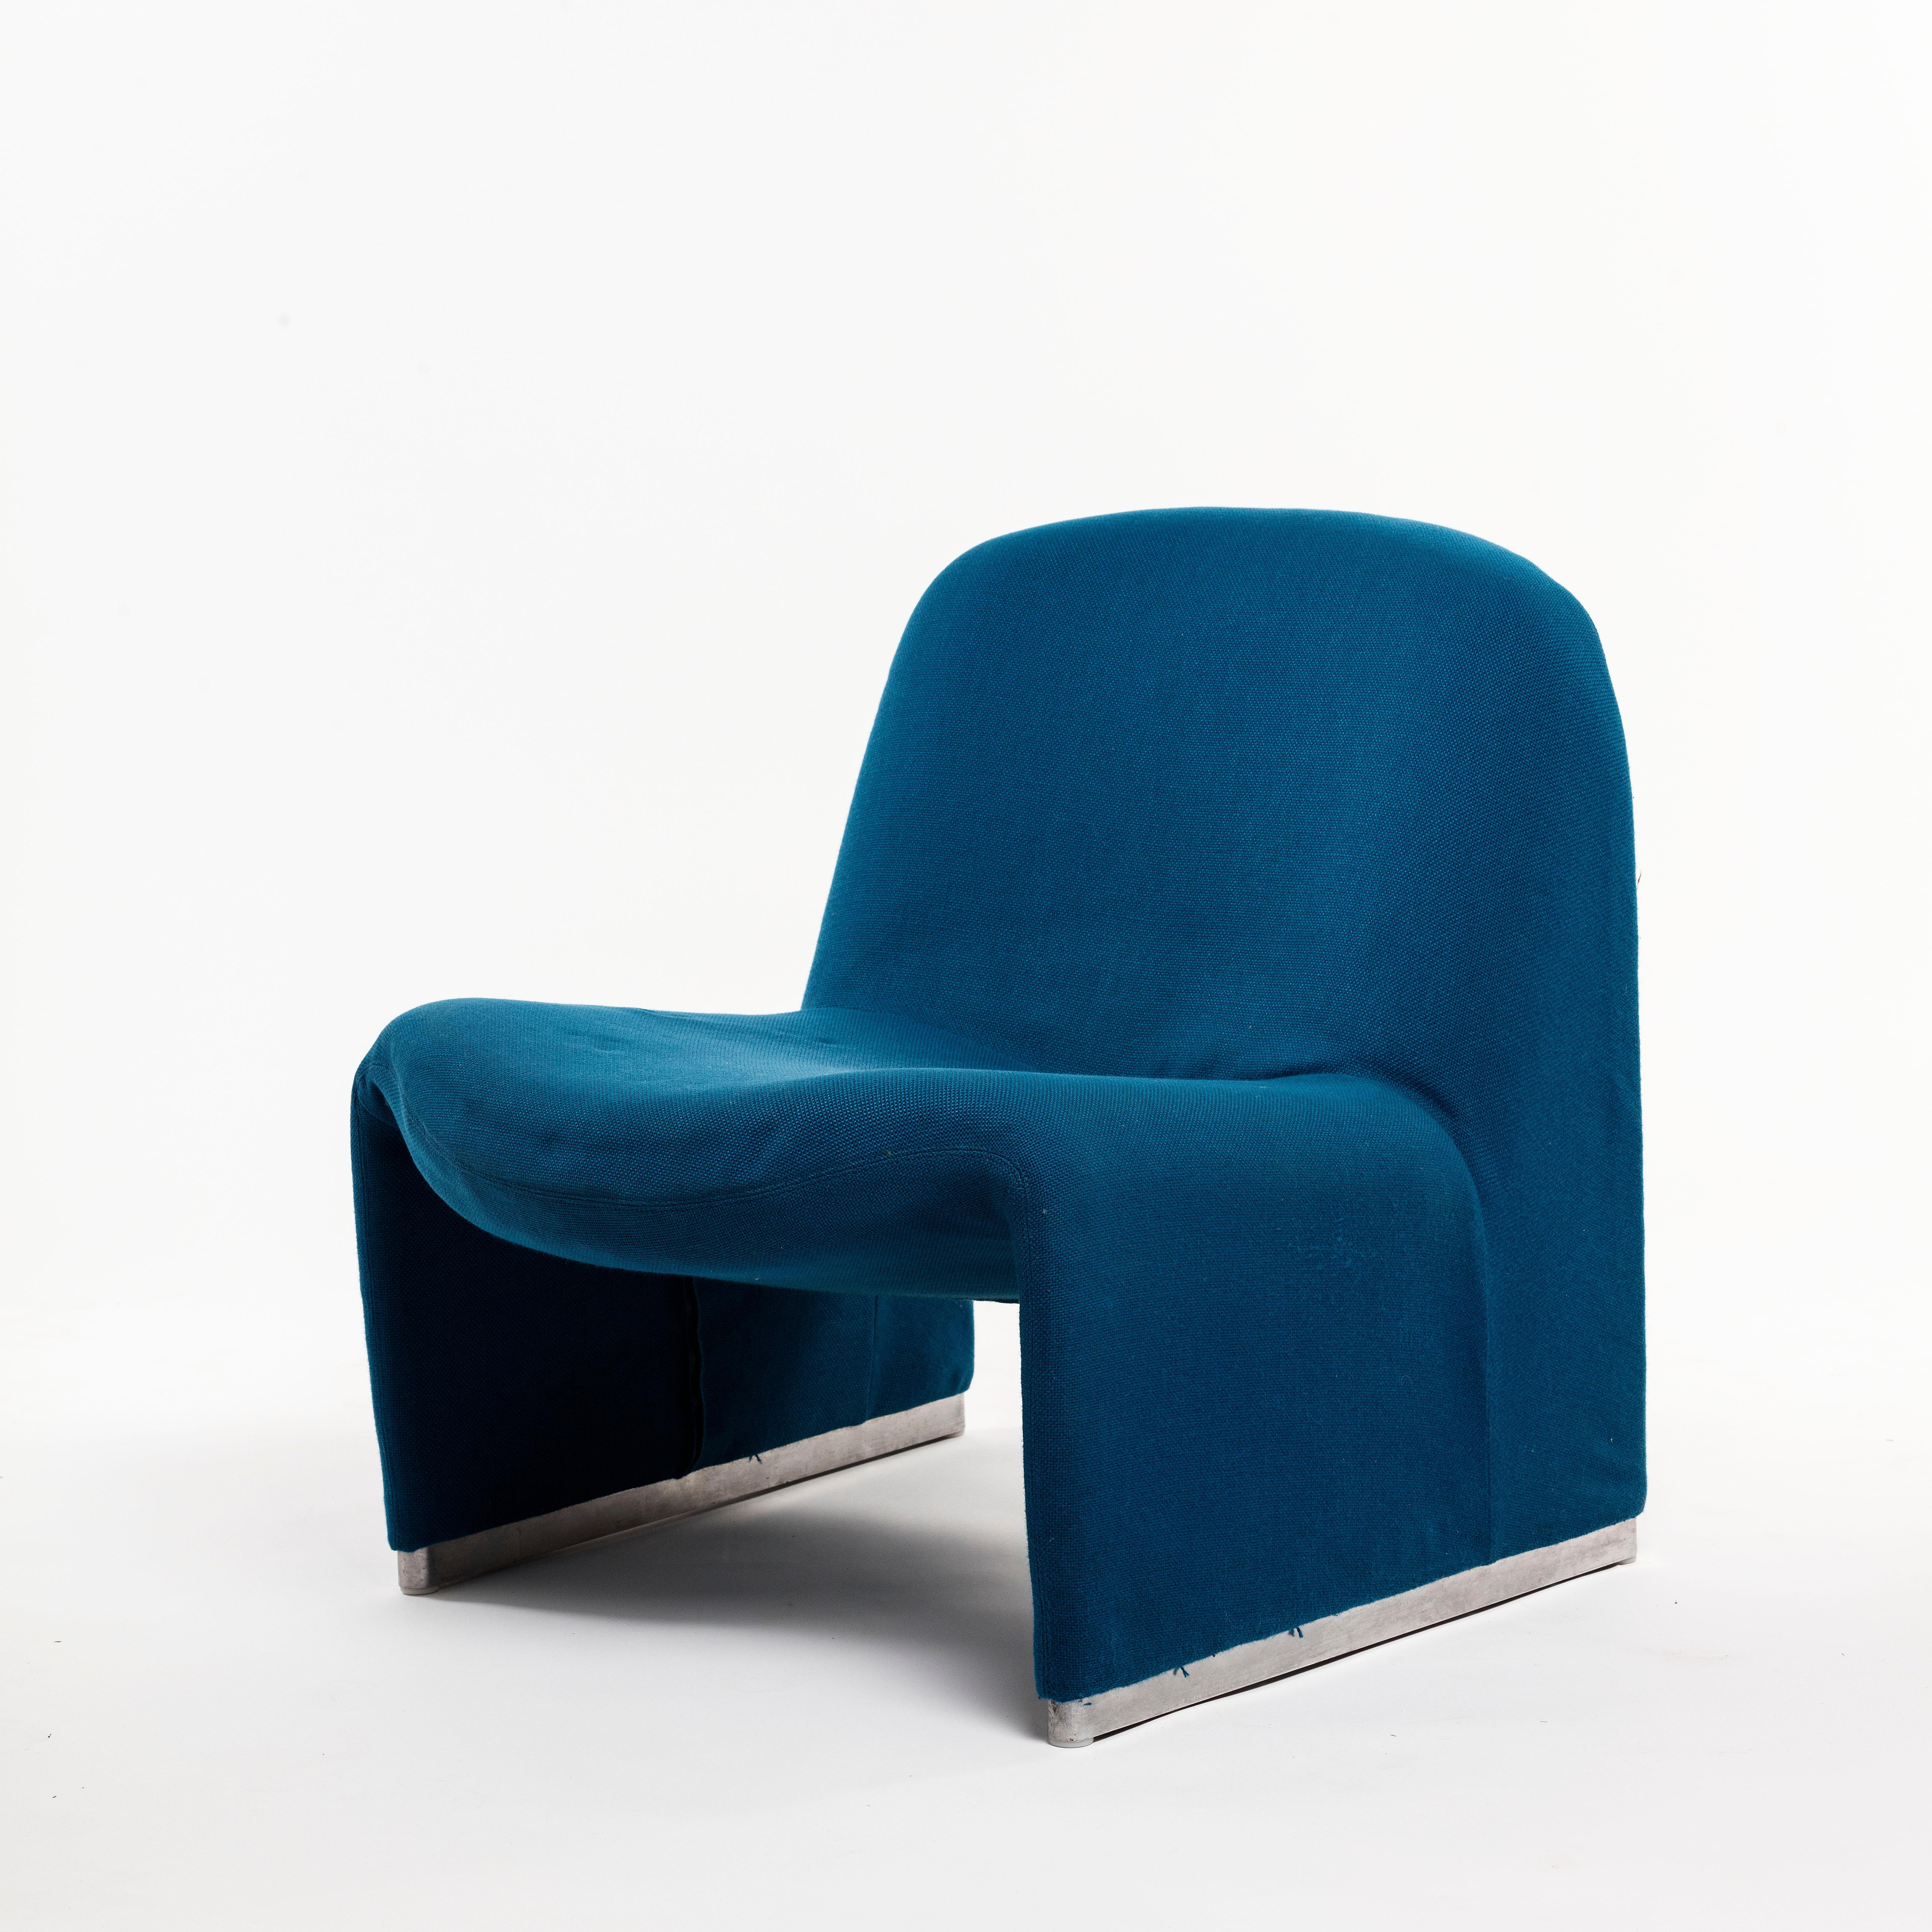 Giancarlo Piretti Alky chairs in original blue upholstery, Italy, 1969

Giancarlo Piretti designed these Alky chairs for Castelli in 1969. Sculptural, fantastic modern design in the original blue fabric in very good vintage condition.